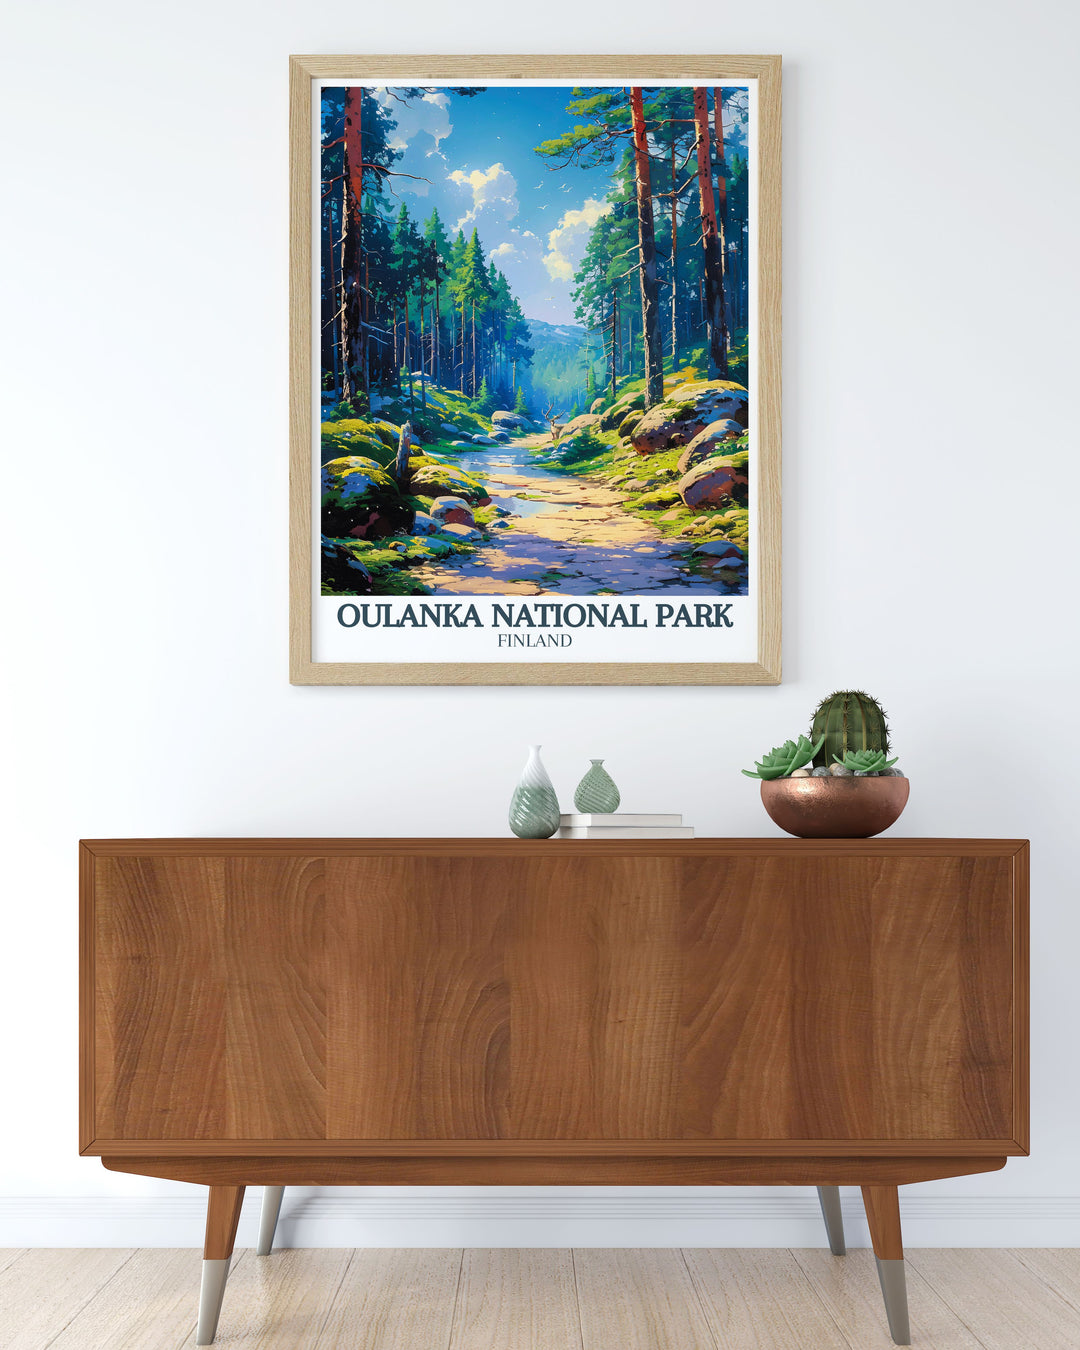 Captivating travel poster of Oulanka river Kiutakongas Rapids. This national park print is perfect for home decoration and a great gift idea. Ideal for fans of hiking trails and the Karhunkierros Hike in Finland.